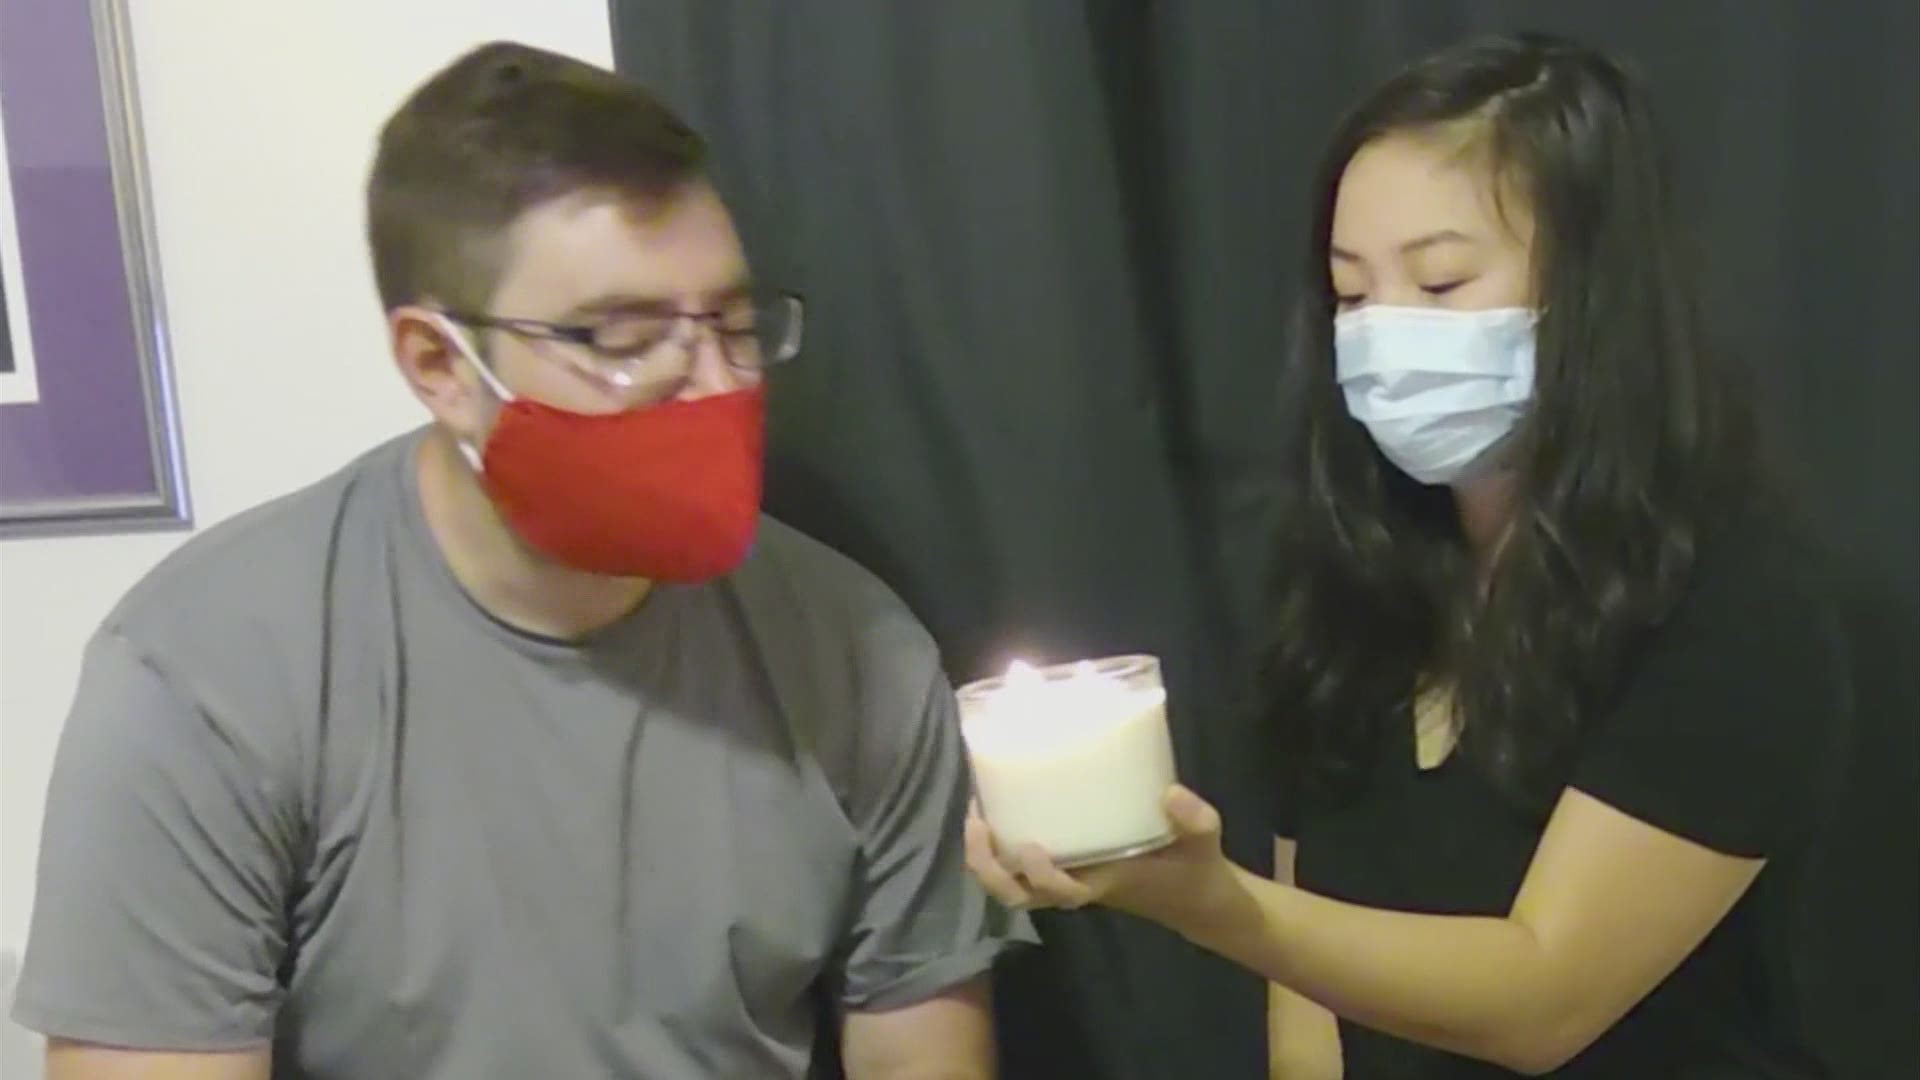 10TV shows you a way to test if your mask is working properly.